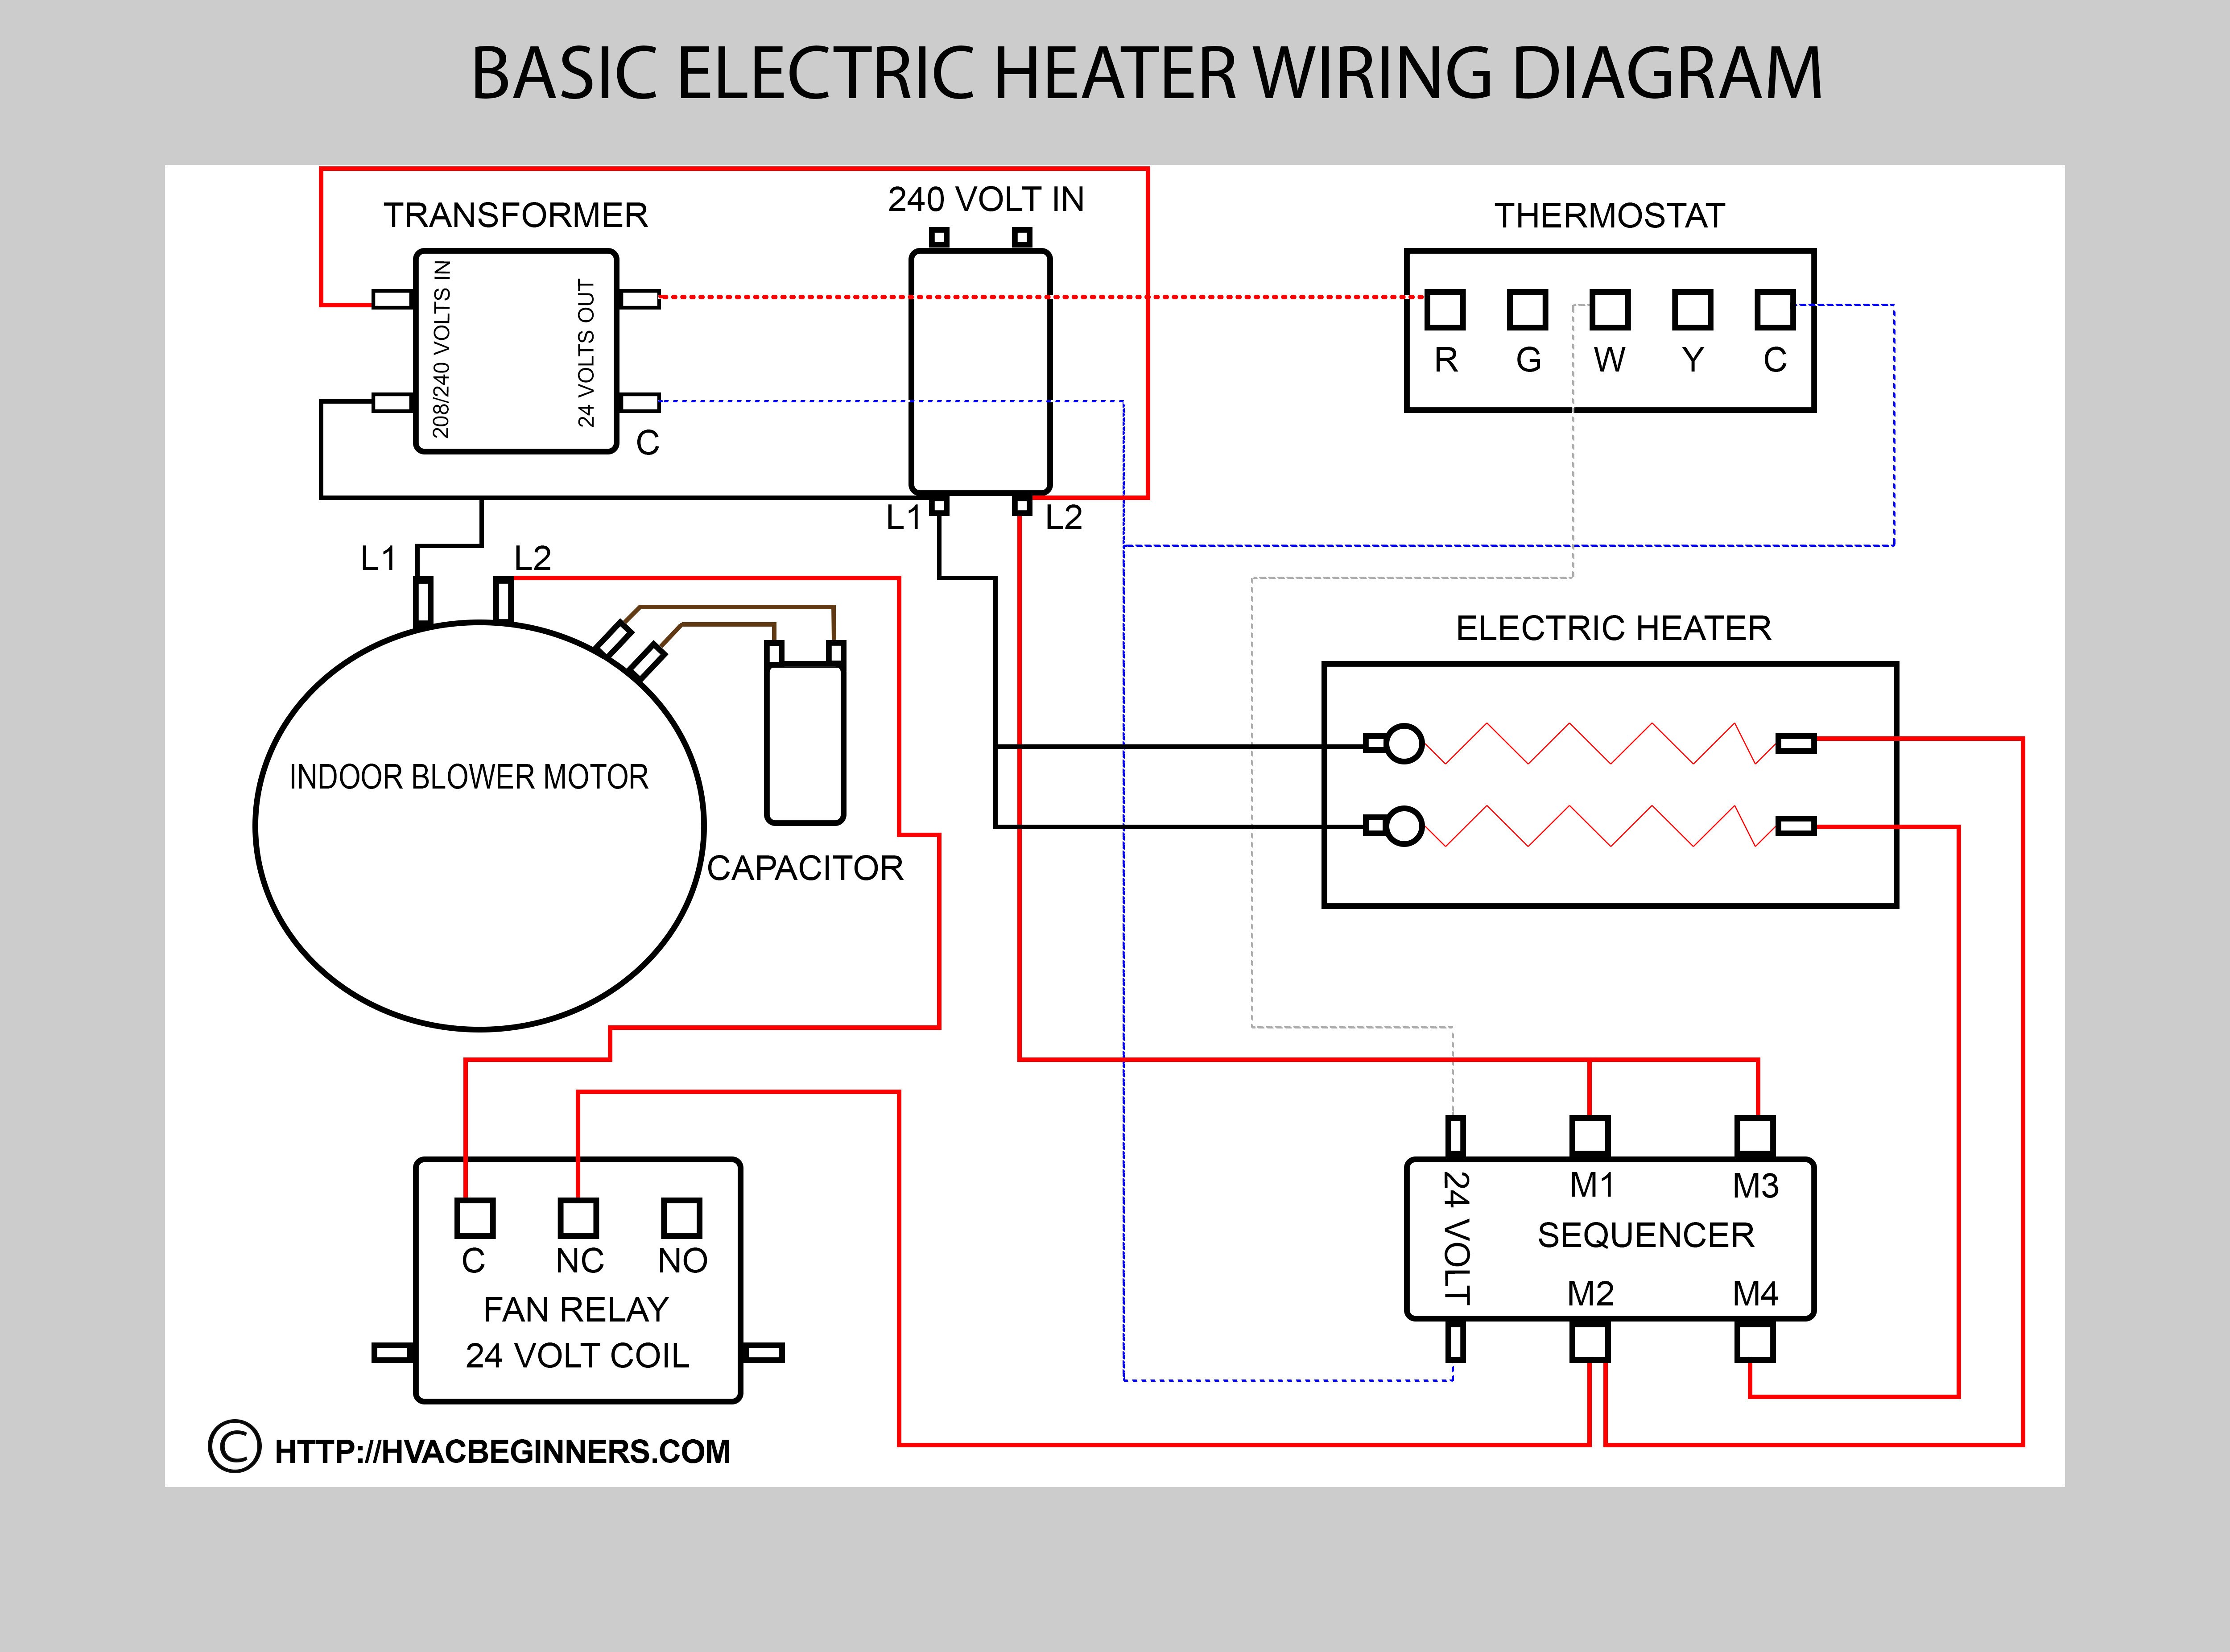 Ac Low Voltage Wiring Diagram Ac Wiring Diagram thermostat to Air Conditioning for Low Voltage Of Ac Low Voltage Wiring Diagram